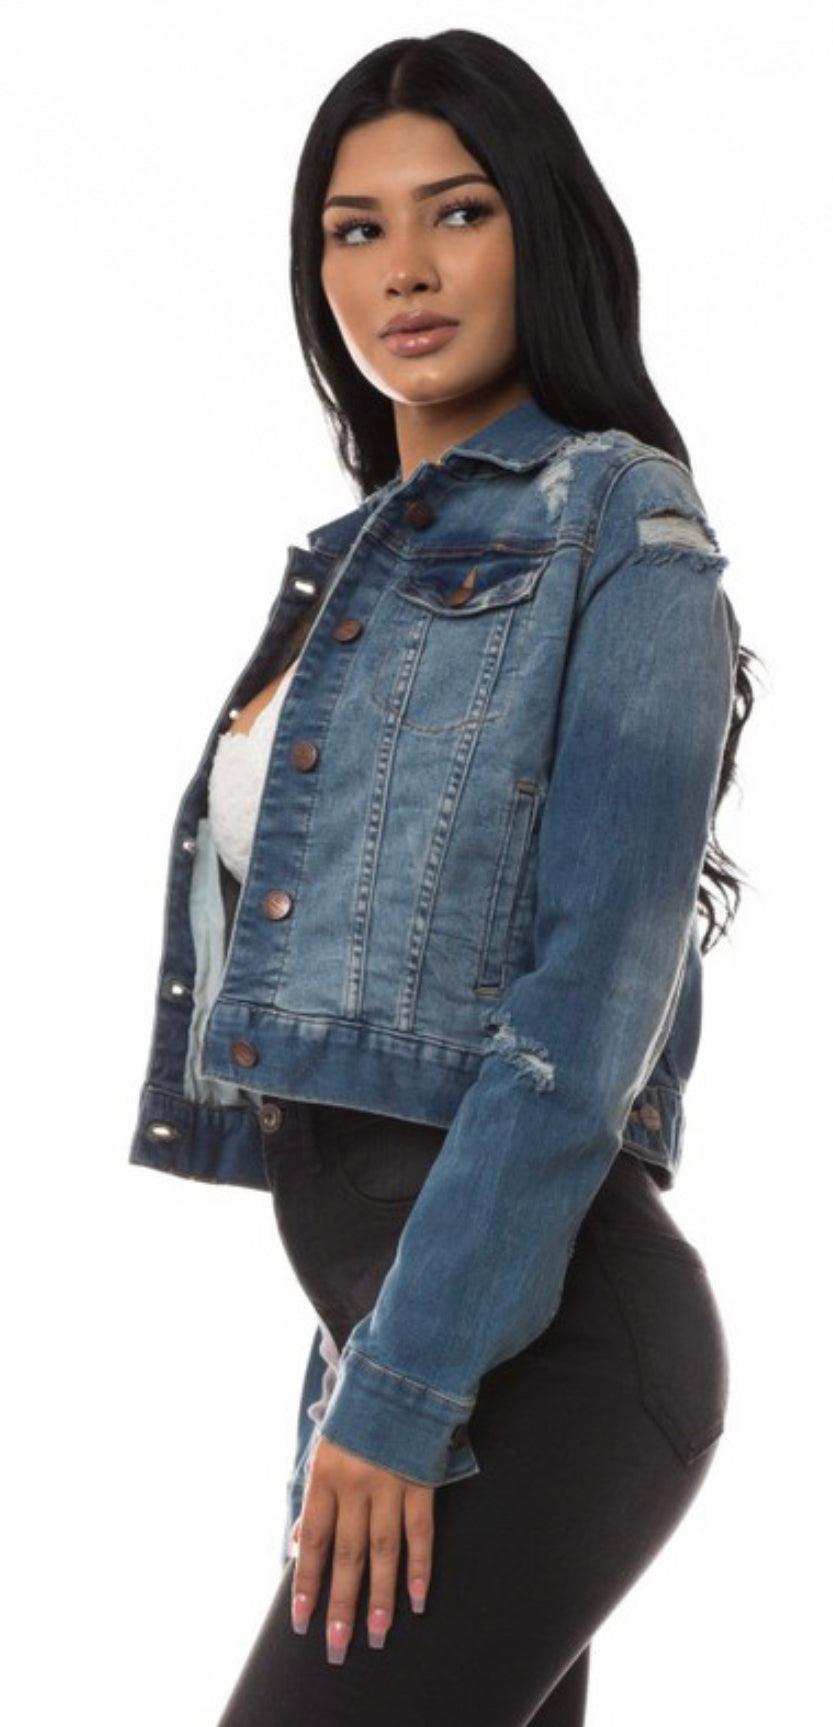 Distressed Jean Jacket - Alexander and Fitz